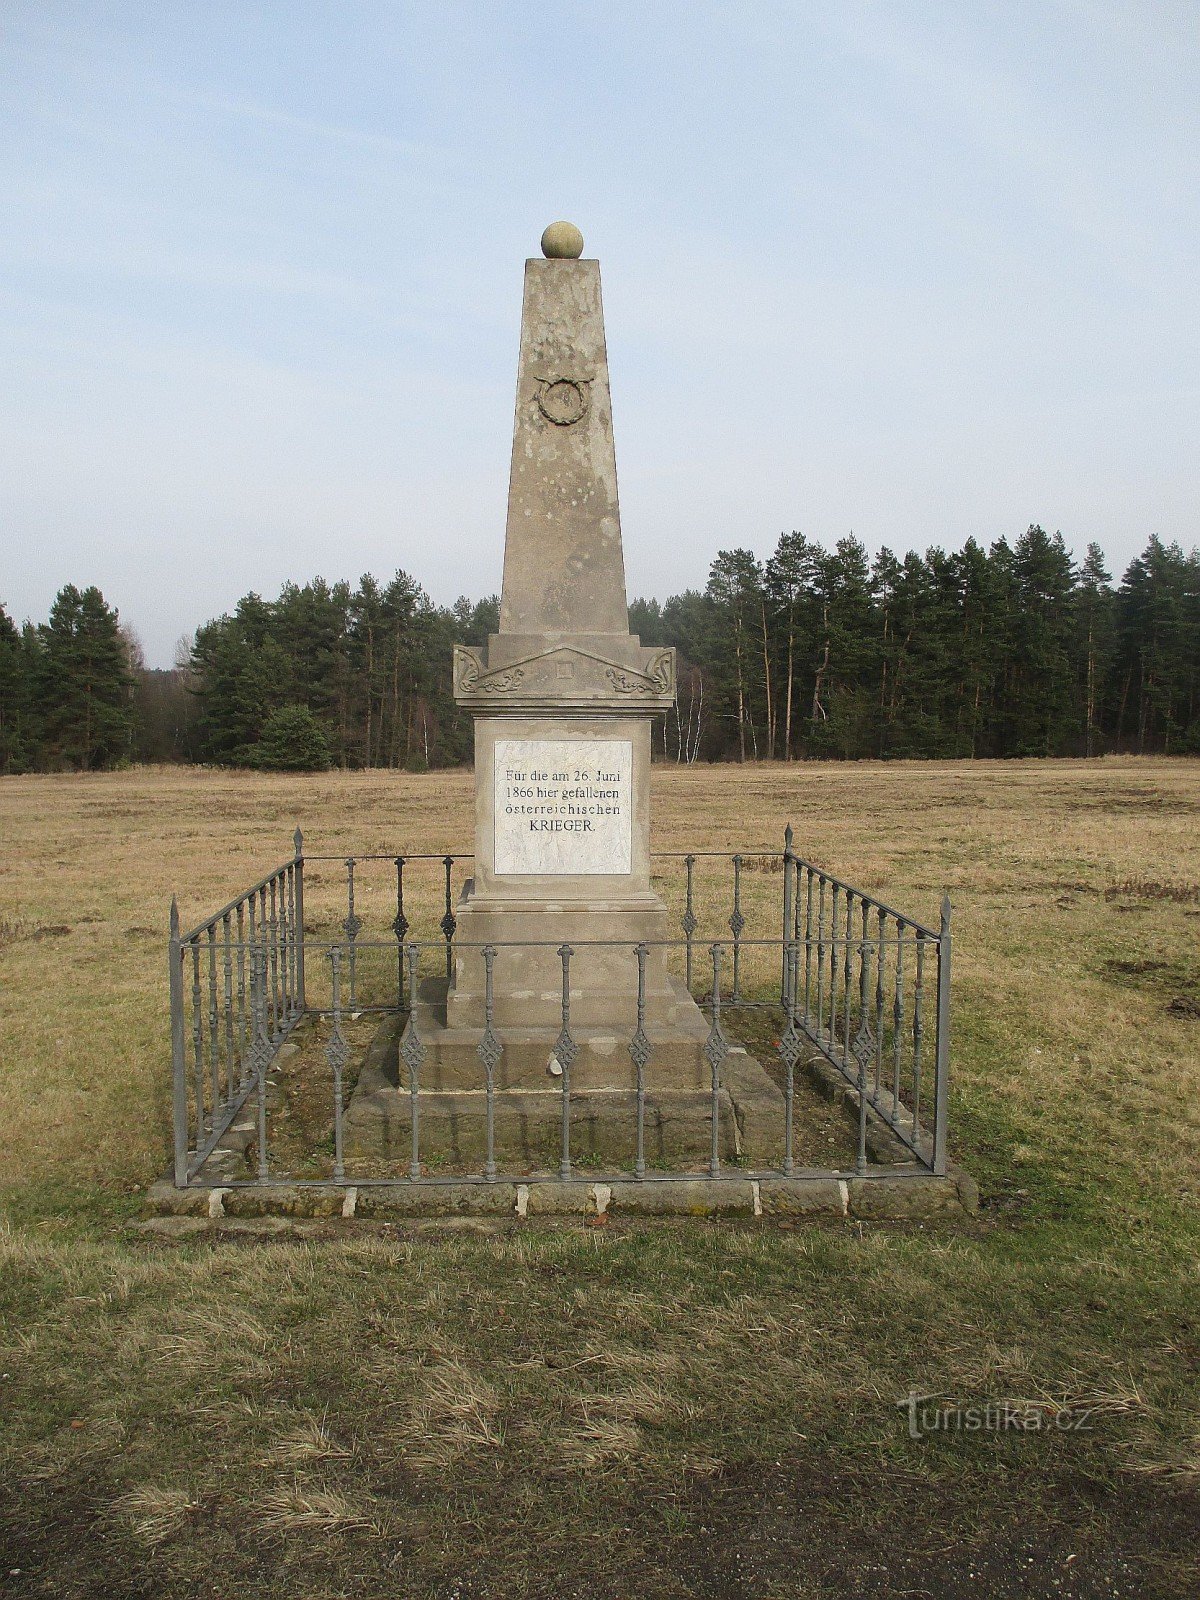 Monument to the Battle of Kuřívod